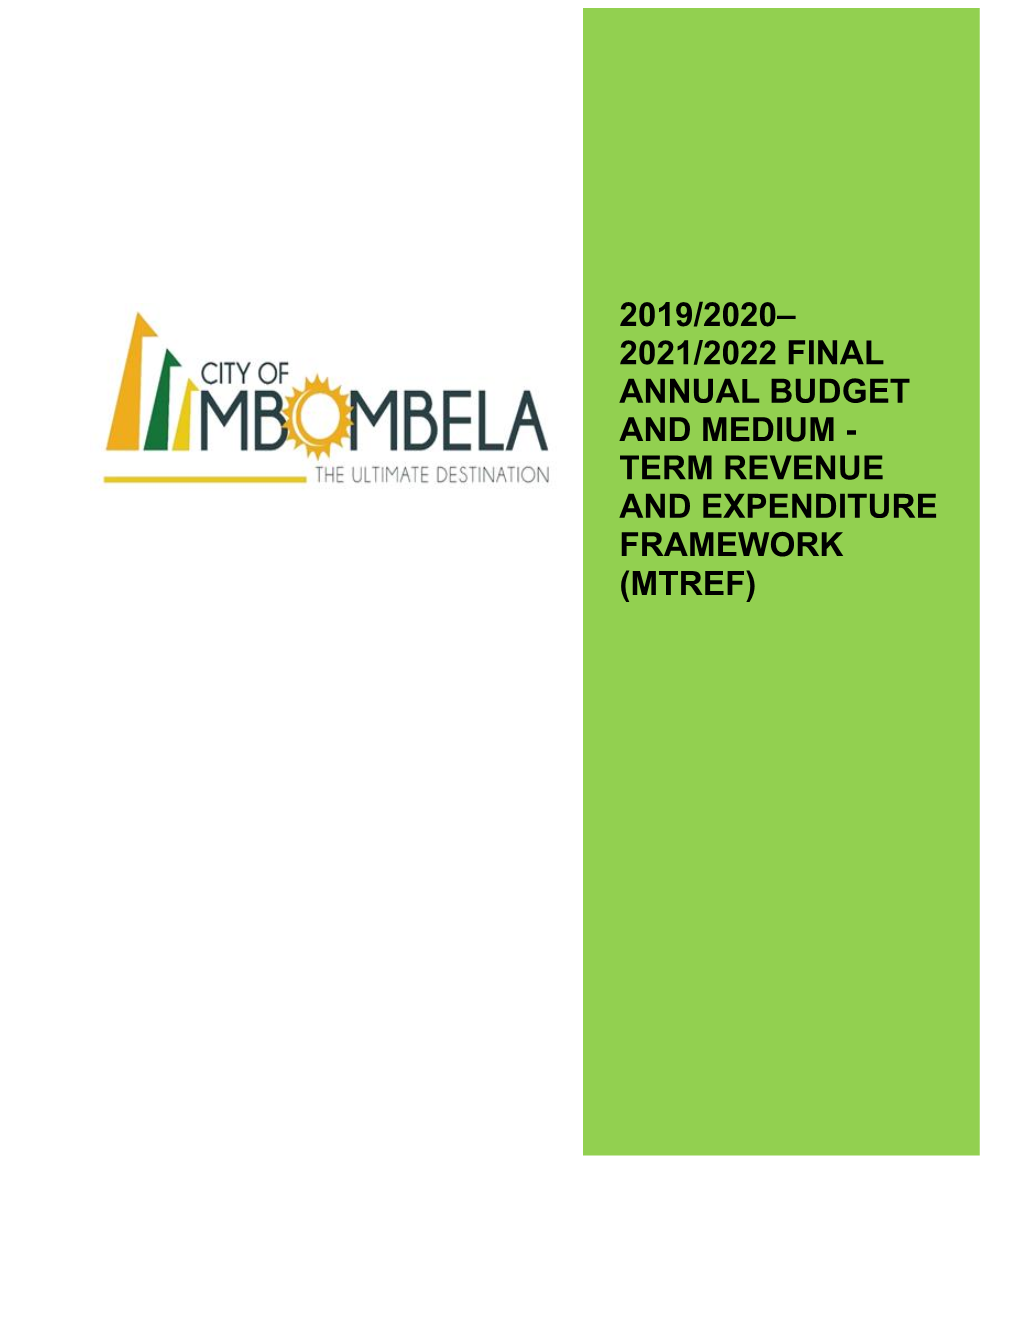 2019/2020– 2021/2022 Final Annual Budget and Medium